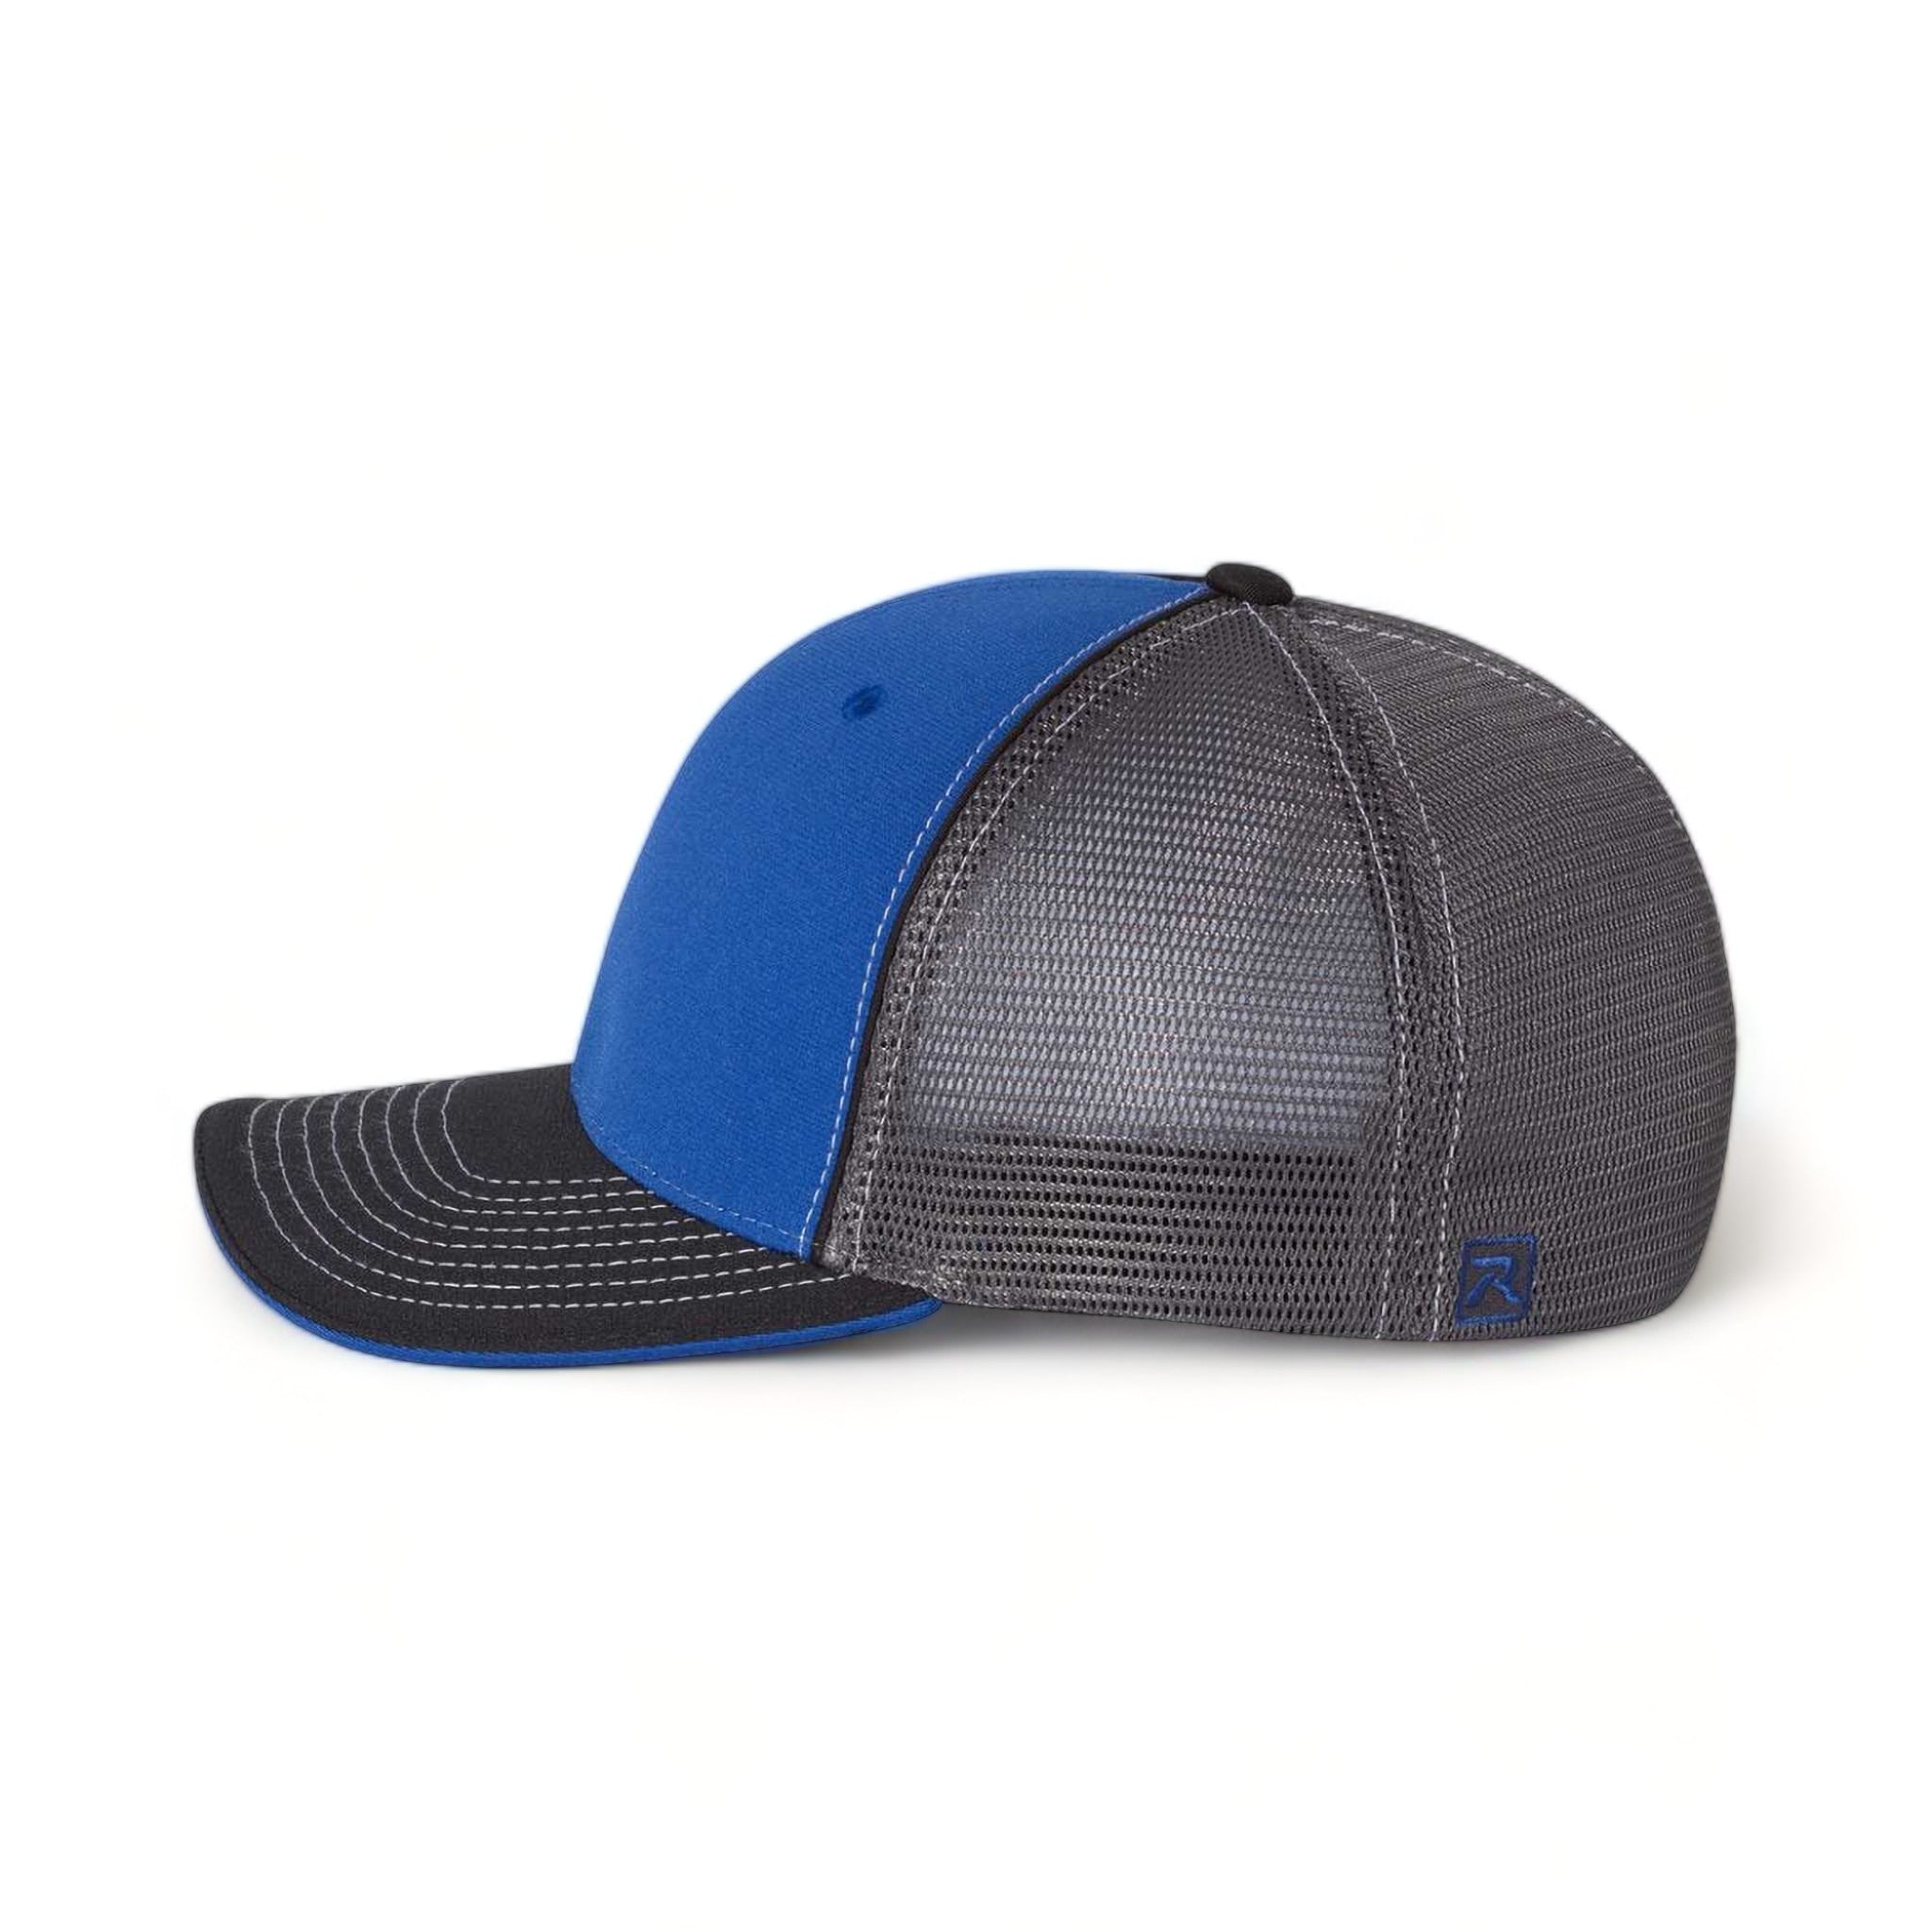 Side view of Richardson 172 custom hat in royal, charcoal and black tri